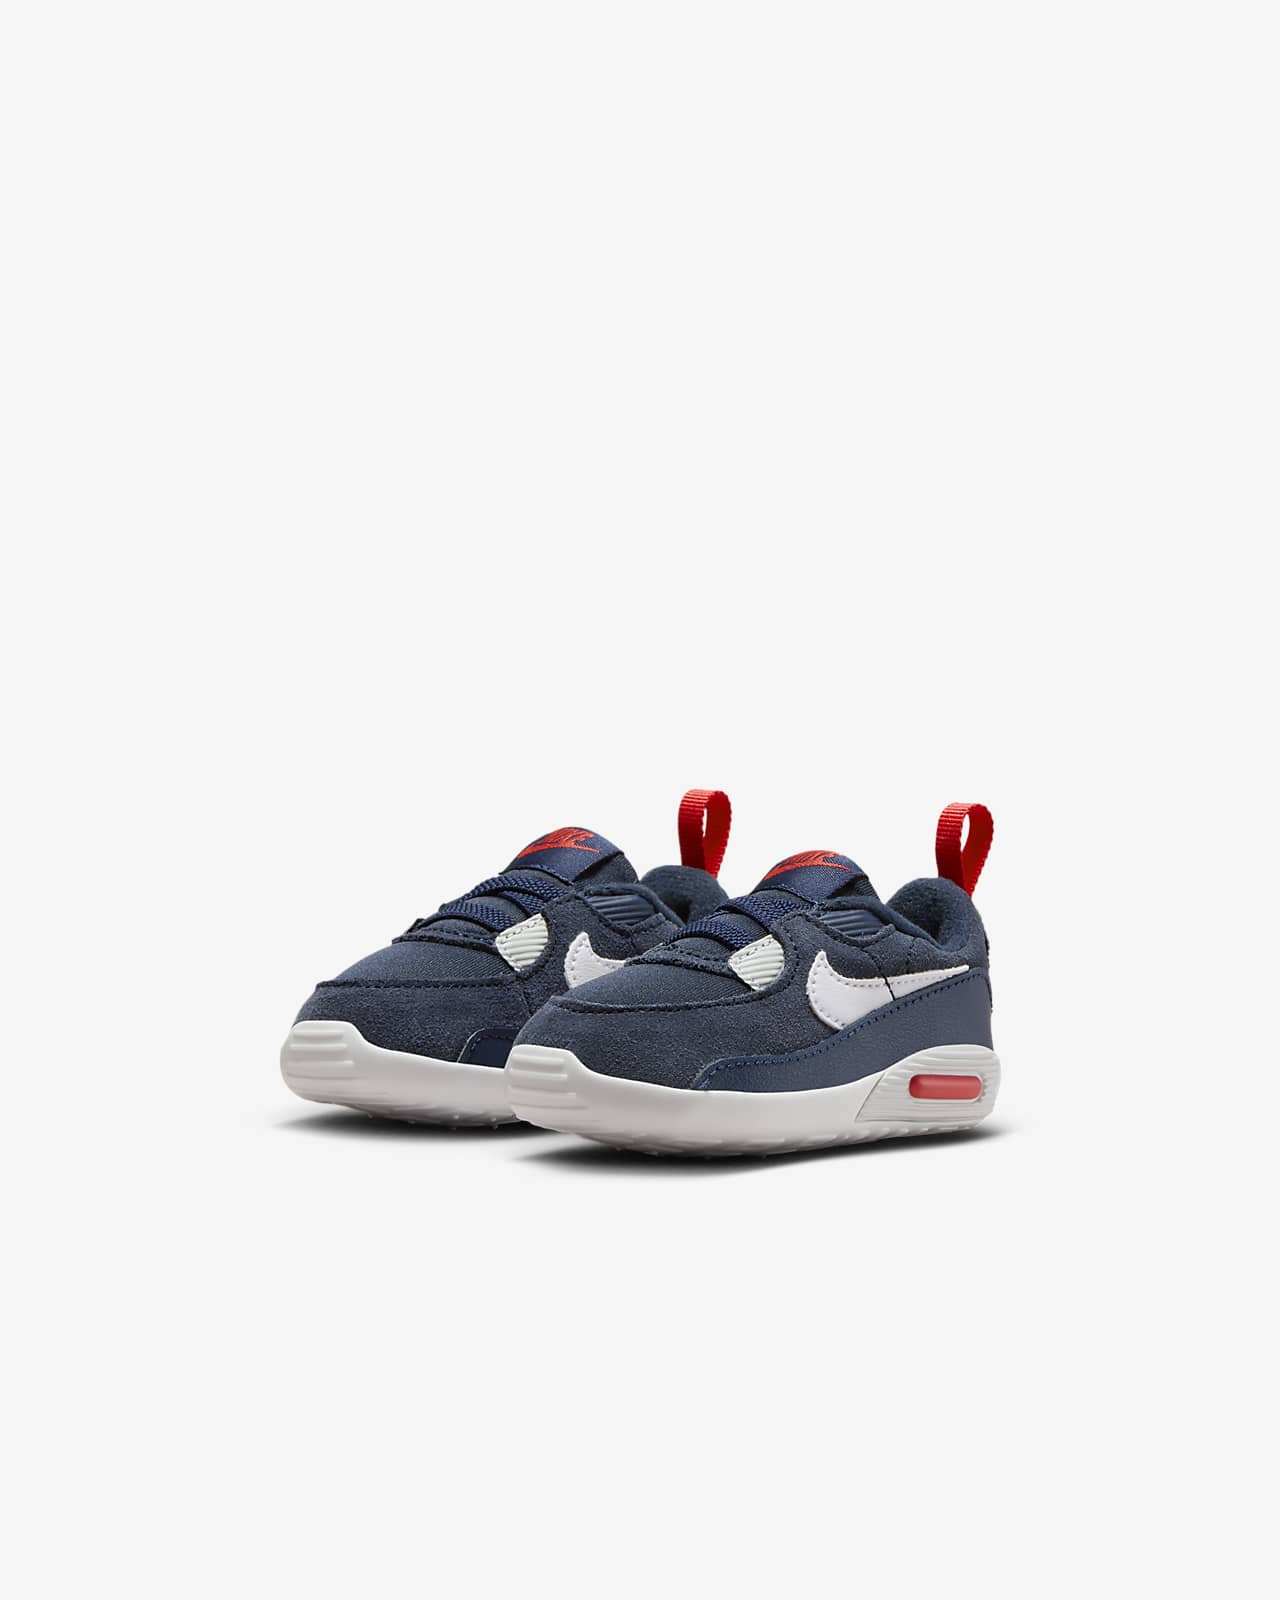 Chaussure chausson - Nike | Beebs